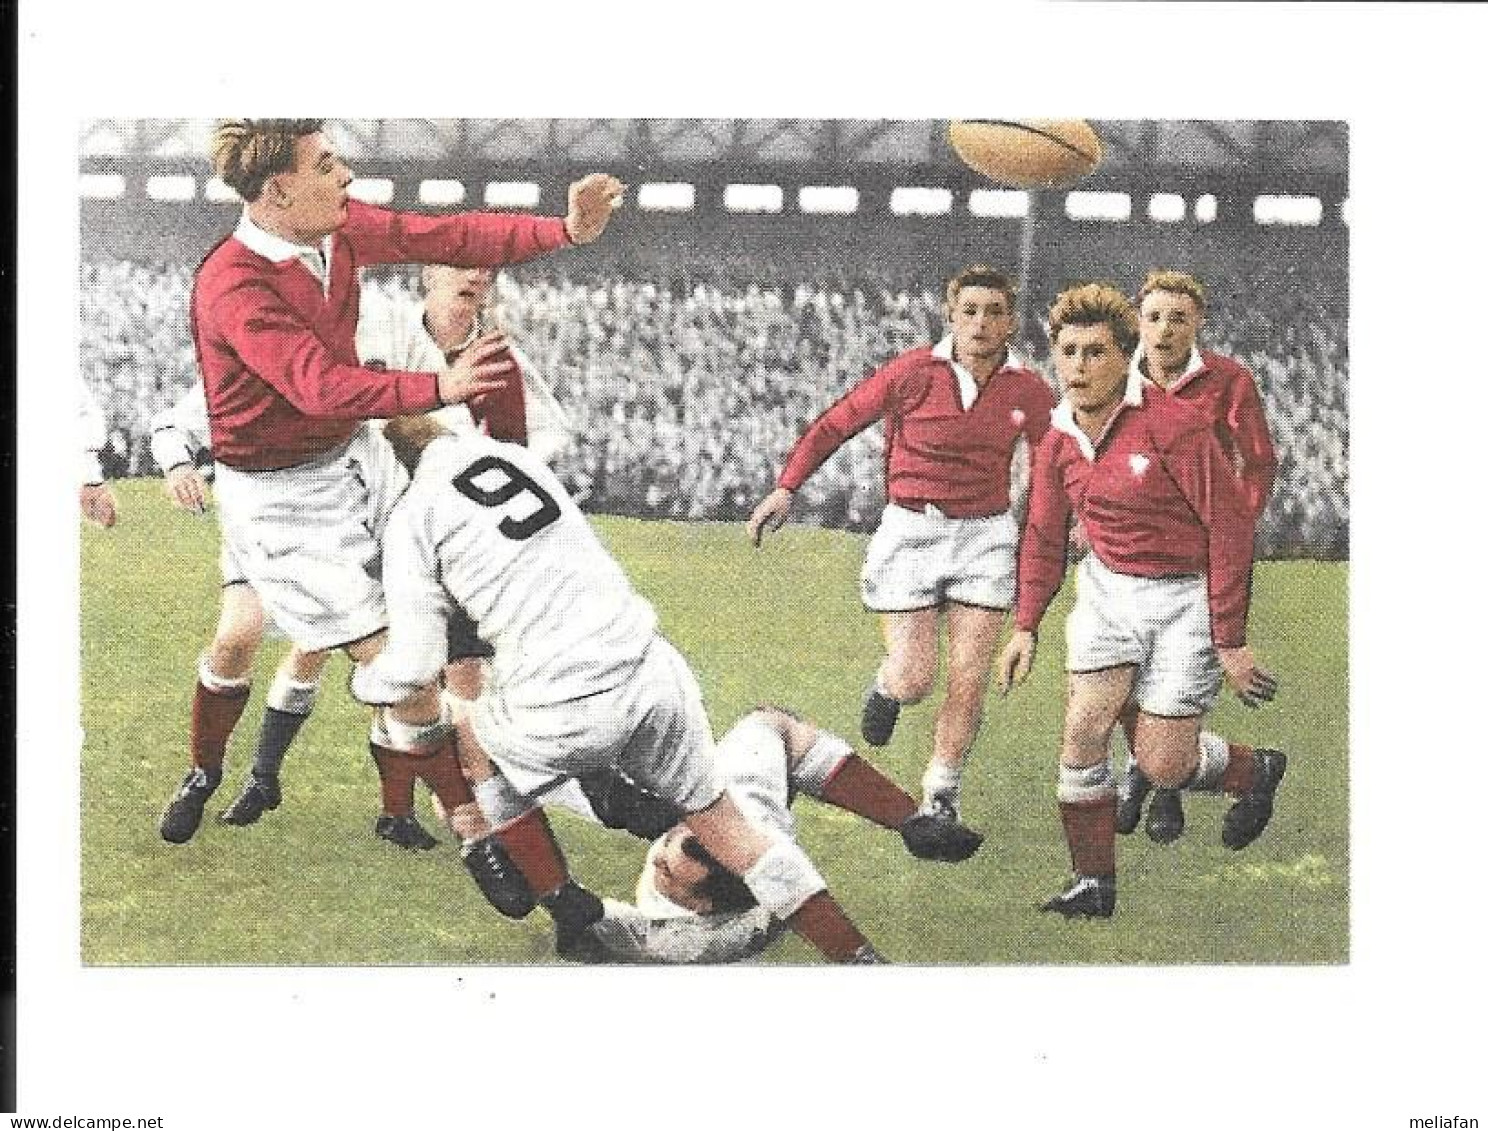 BK47 - IMAGE BLUE BAND - RUGBY ENGLAND VS WALES AT TWICKENHAM - 1952 ? - Rugby